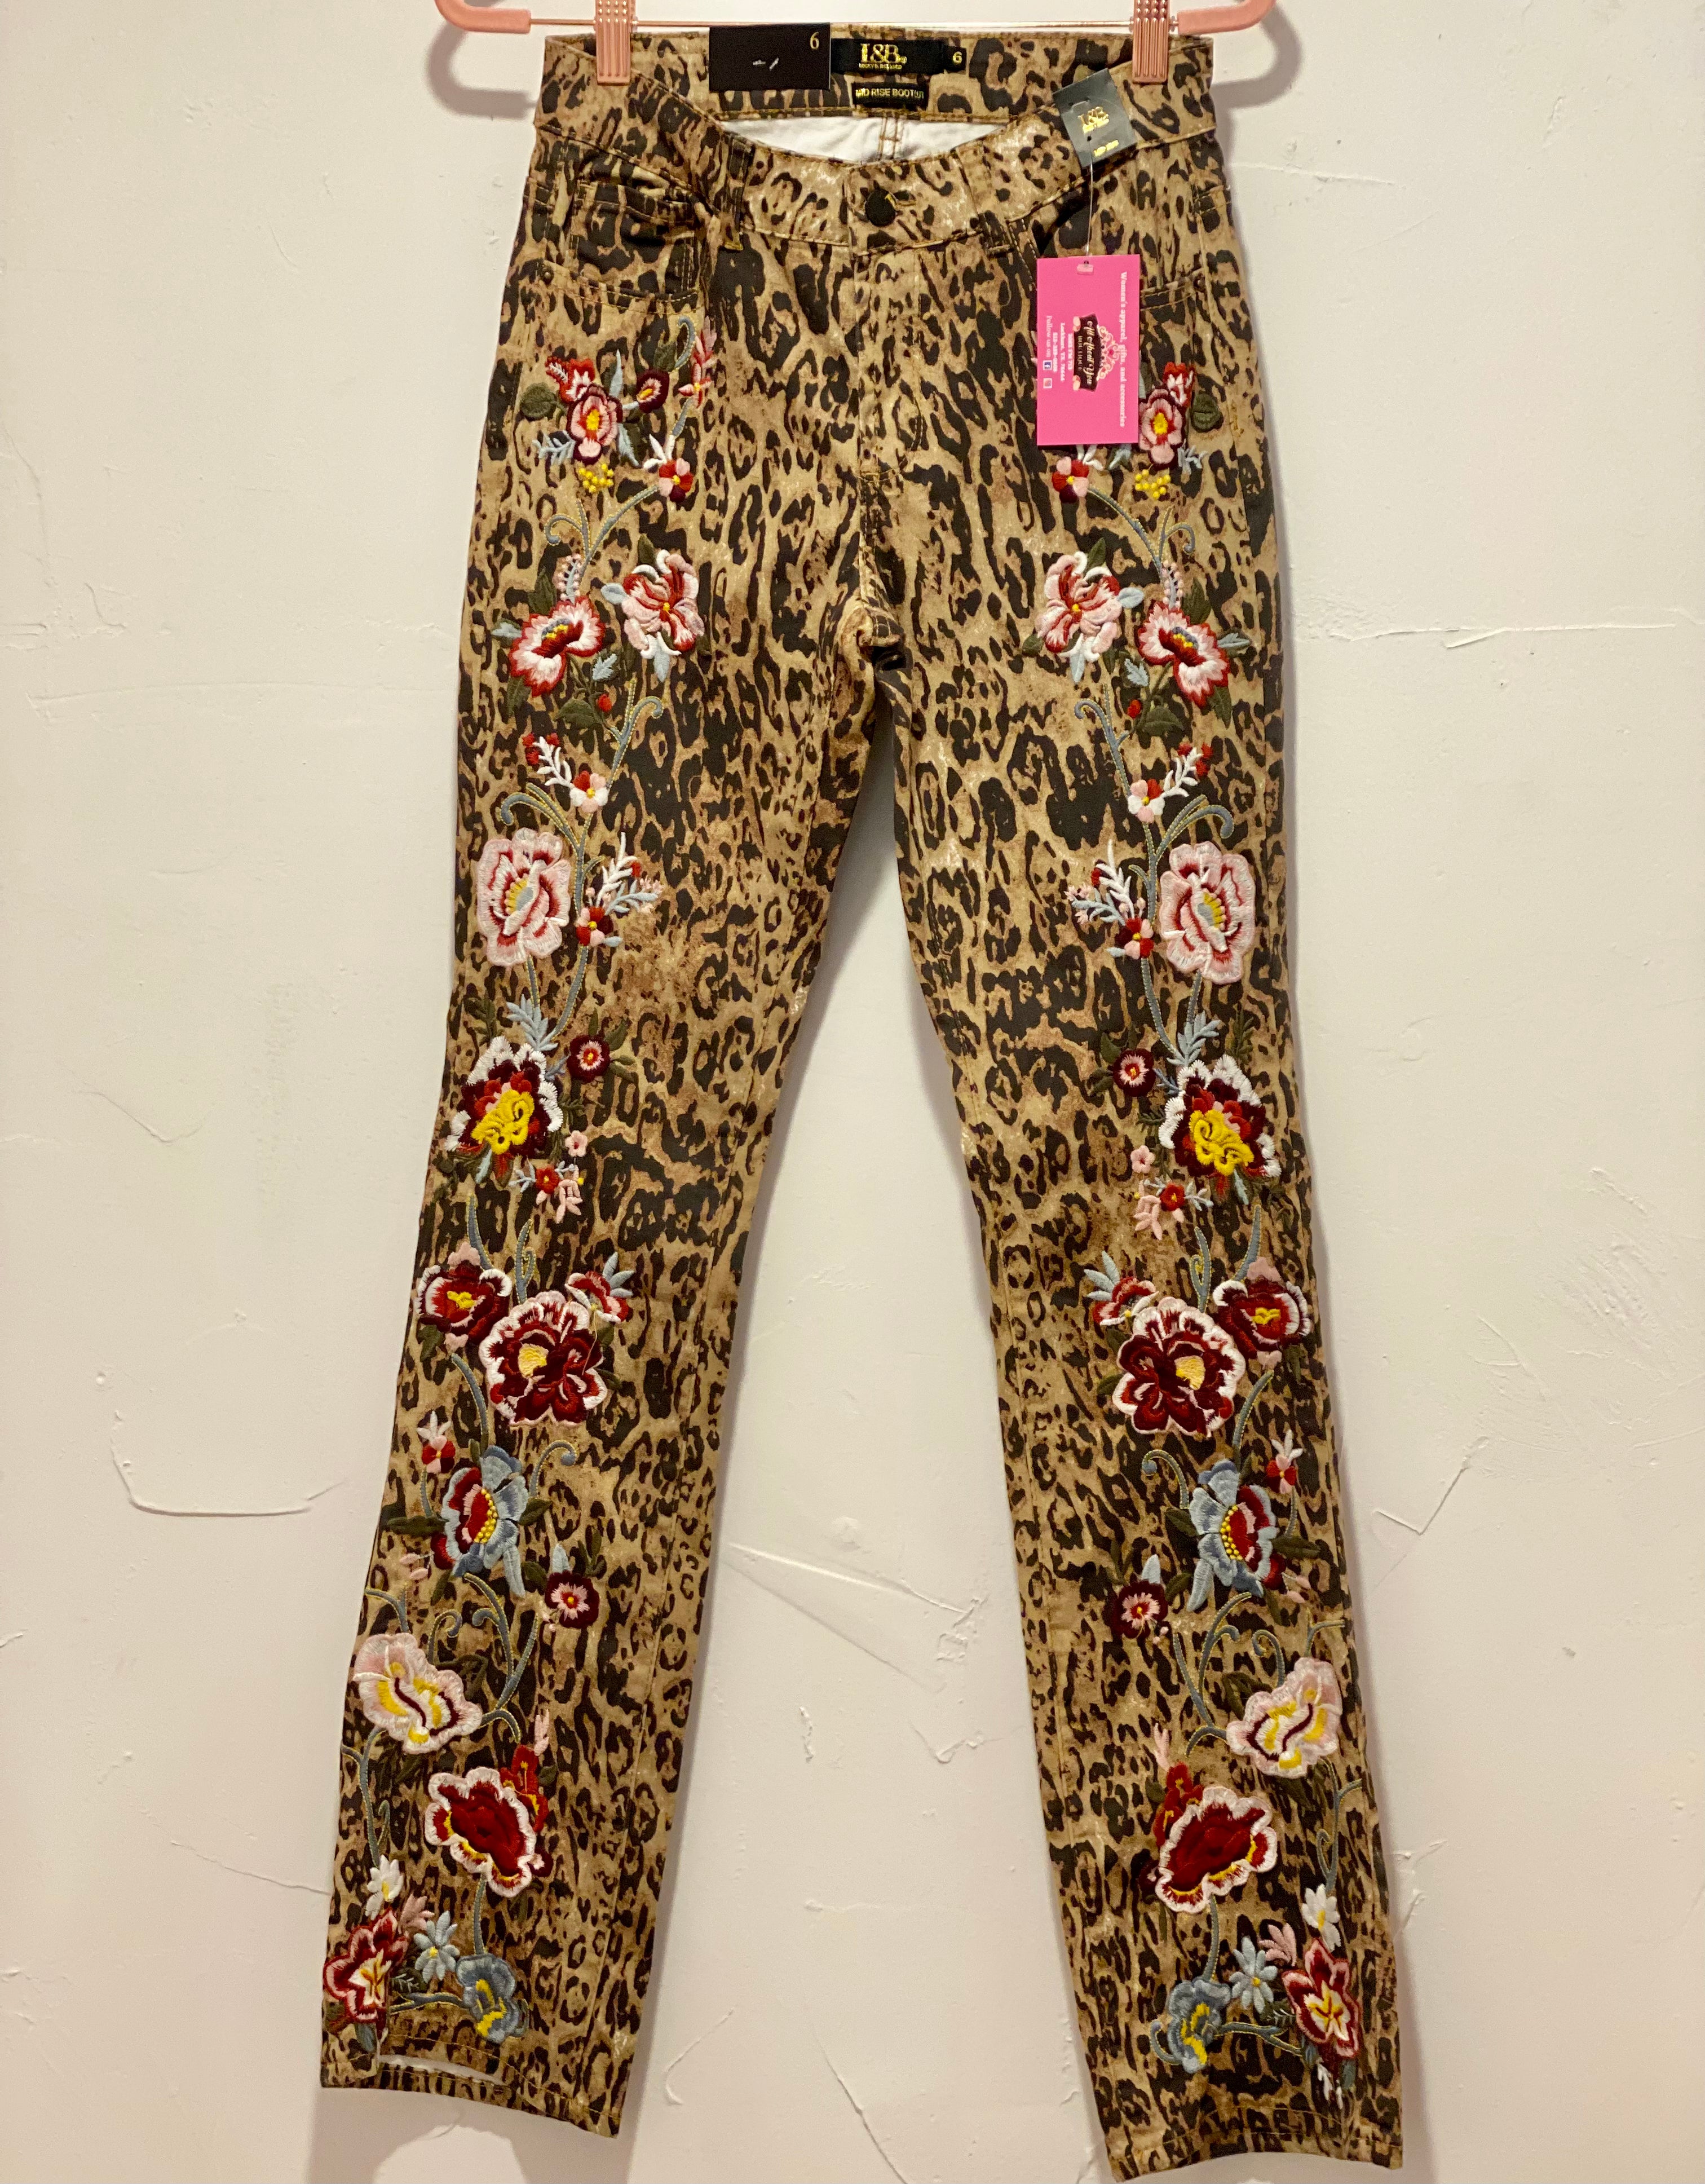 L & B leopard bootcut jeans with  embroidery